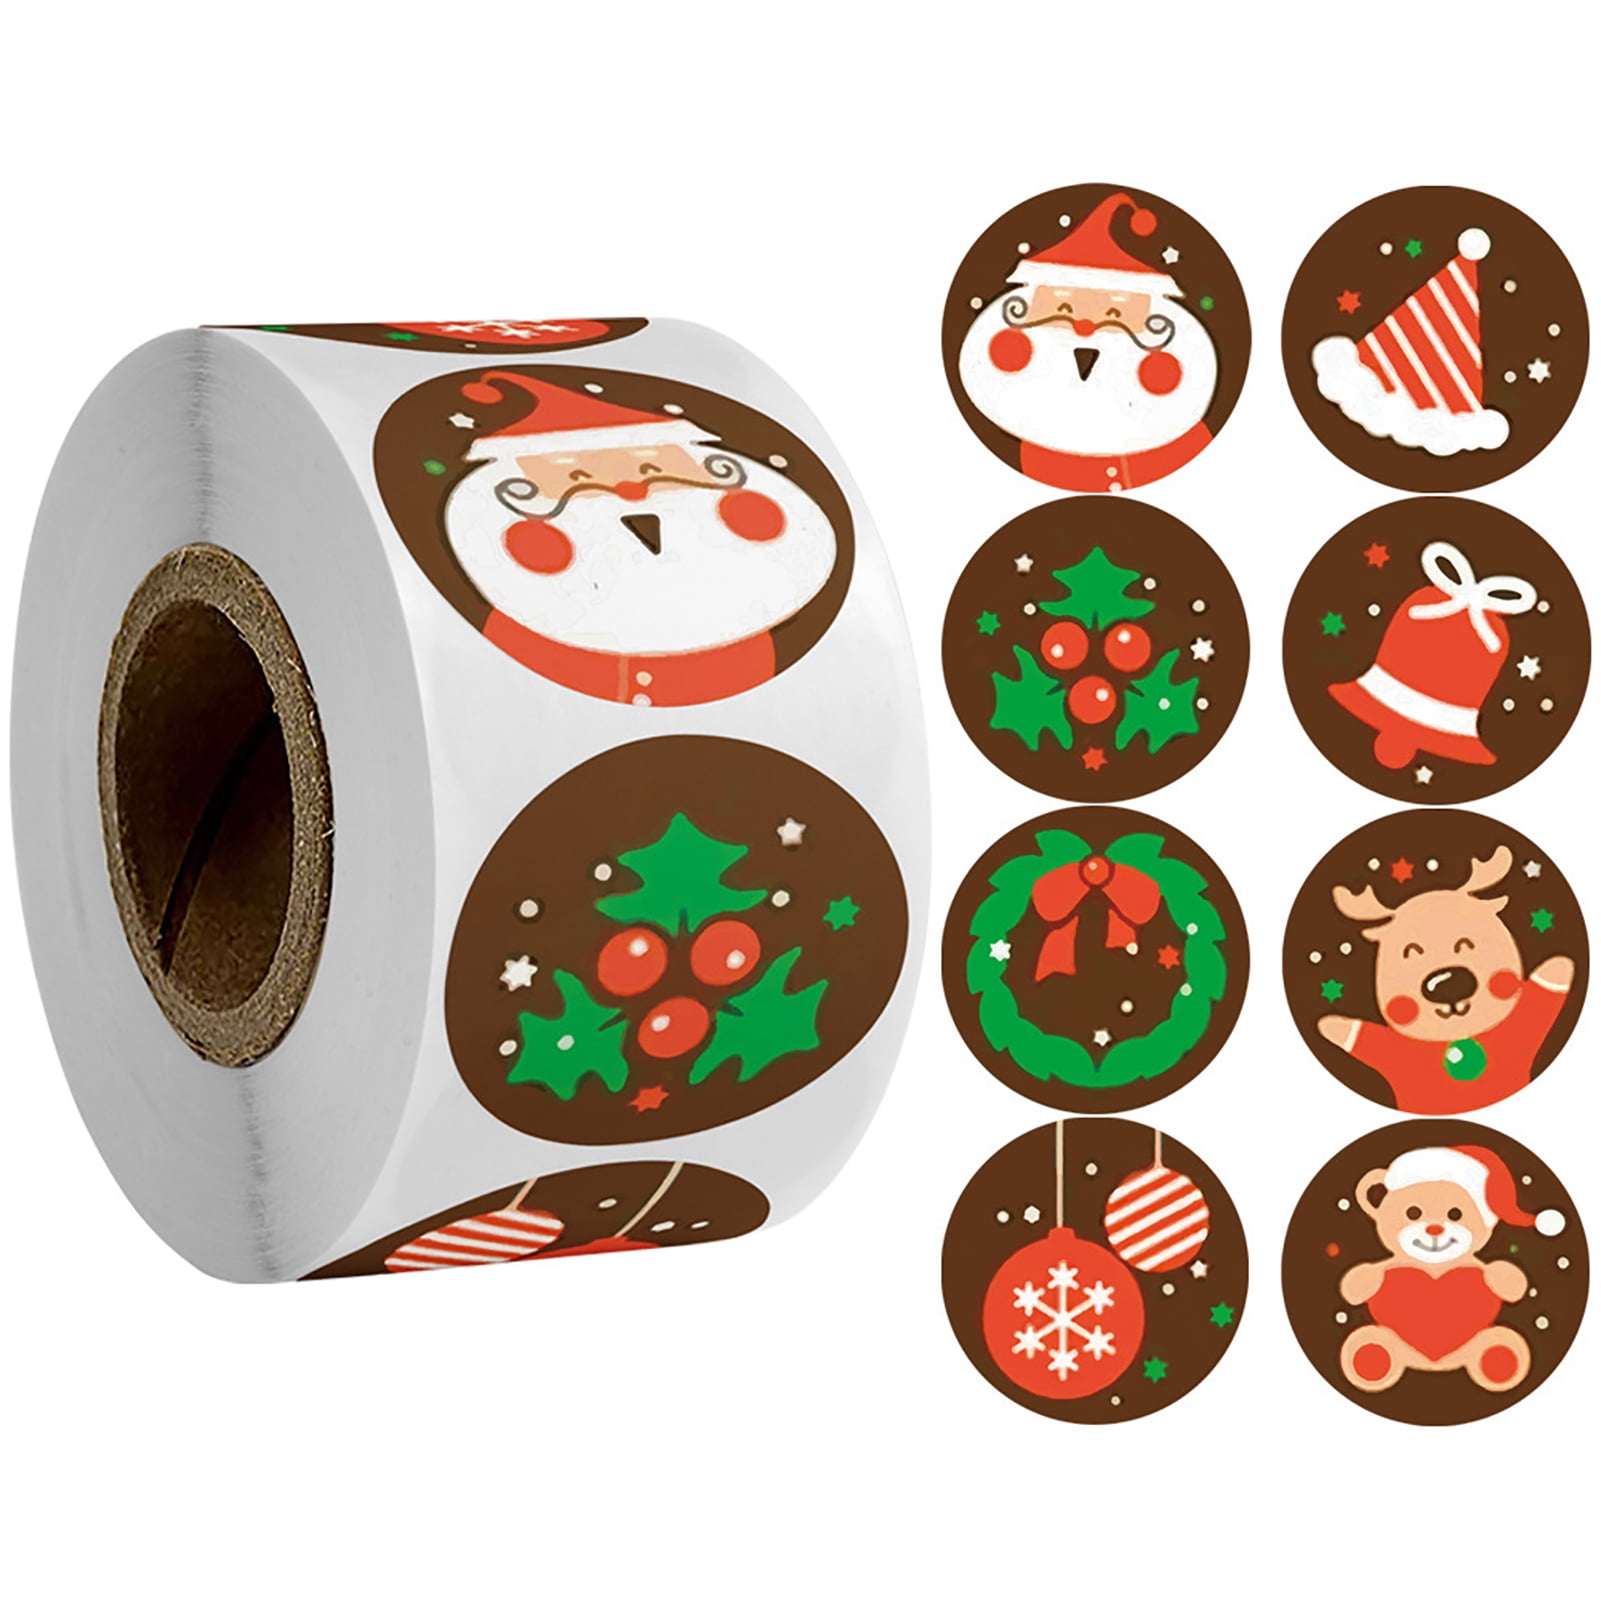 D-Orange 500Pcs Christmas Stickers Roll 25mm Round Decorative Sealing Stickers Christmas Round Adhesive Stickers Labels for Christmas Decorations DIY Craft Scrapbooking Card Making 